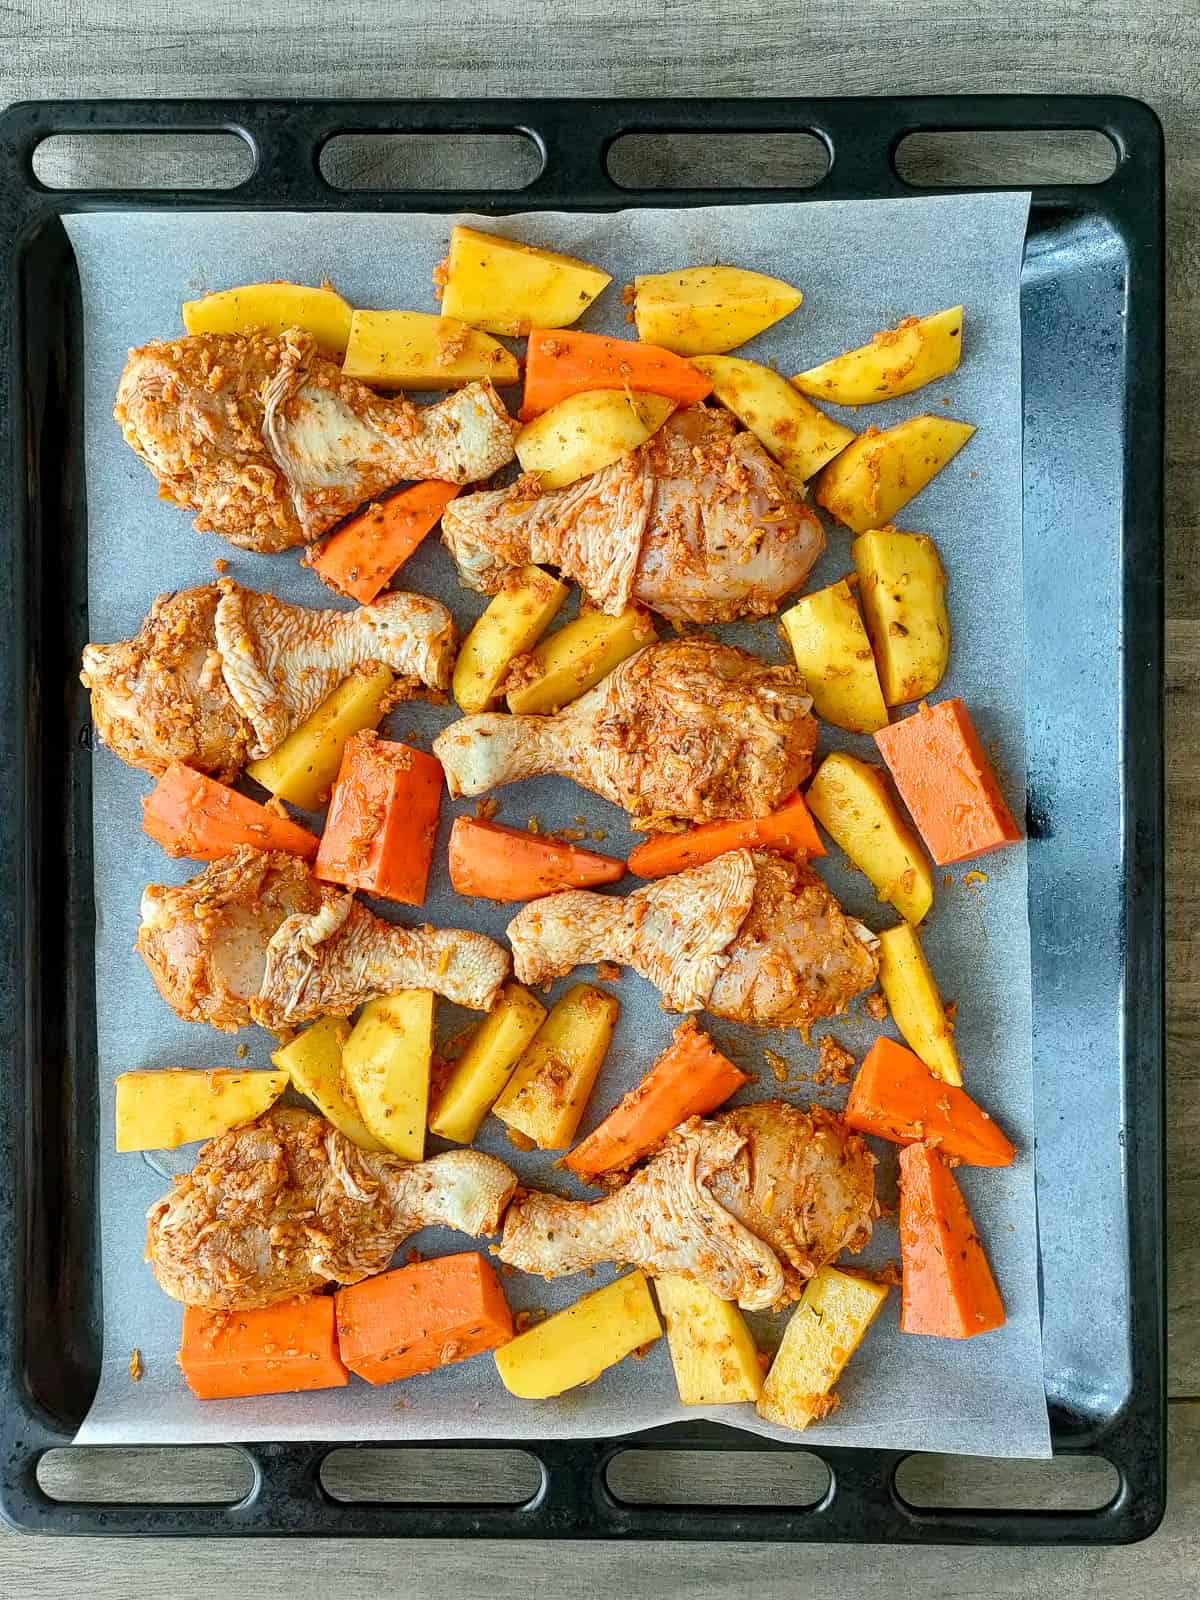 chicken drumsticks and potatoes and sweet potatoes with herb and garlic seasoning on a baking sheet.